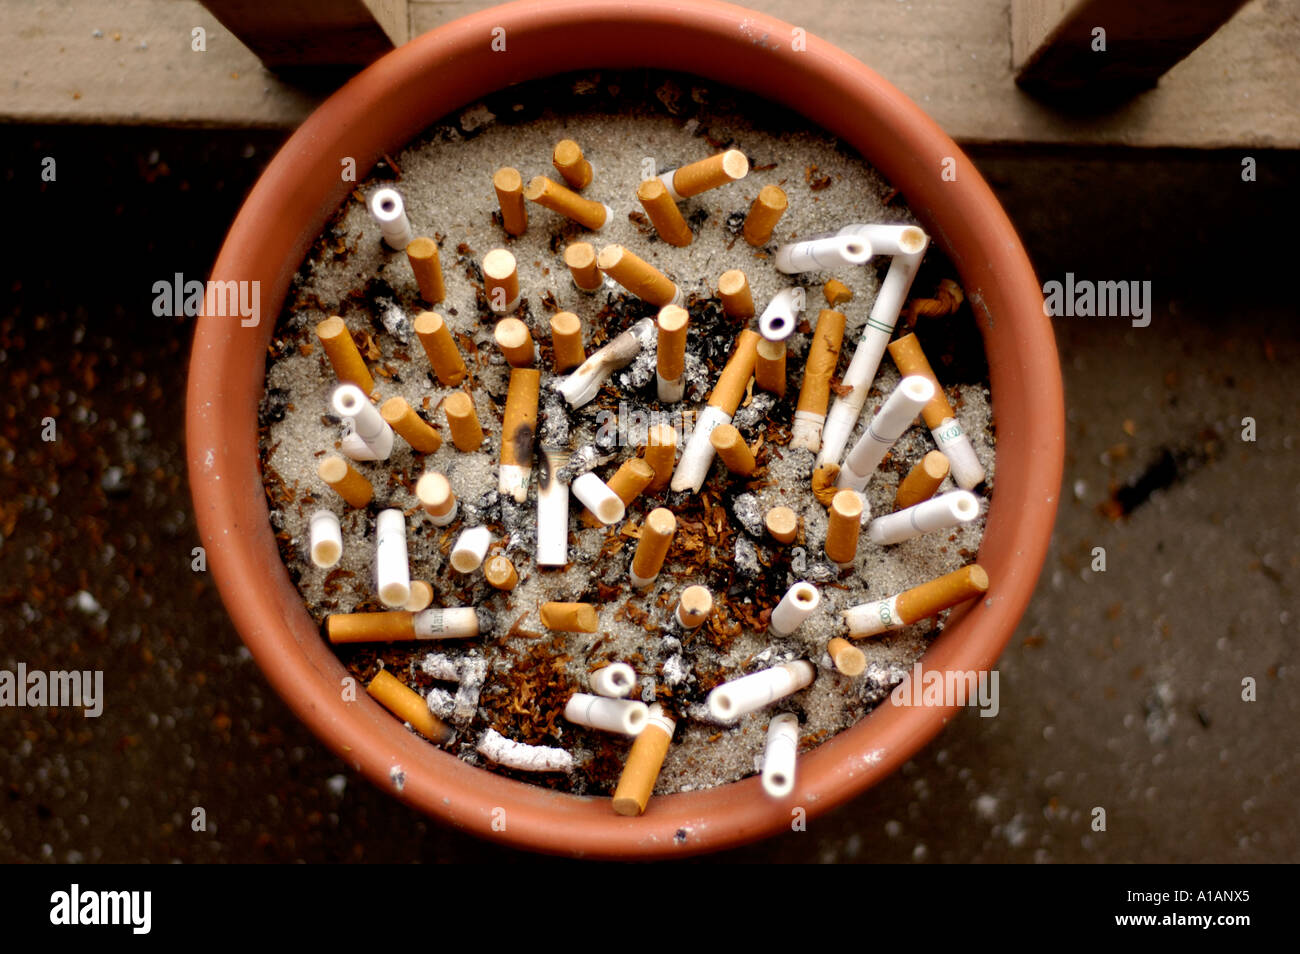 Plant pot used as an ashtray for cigarette butts Stock Photo - Alamy